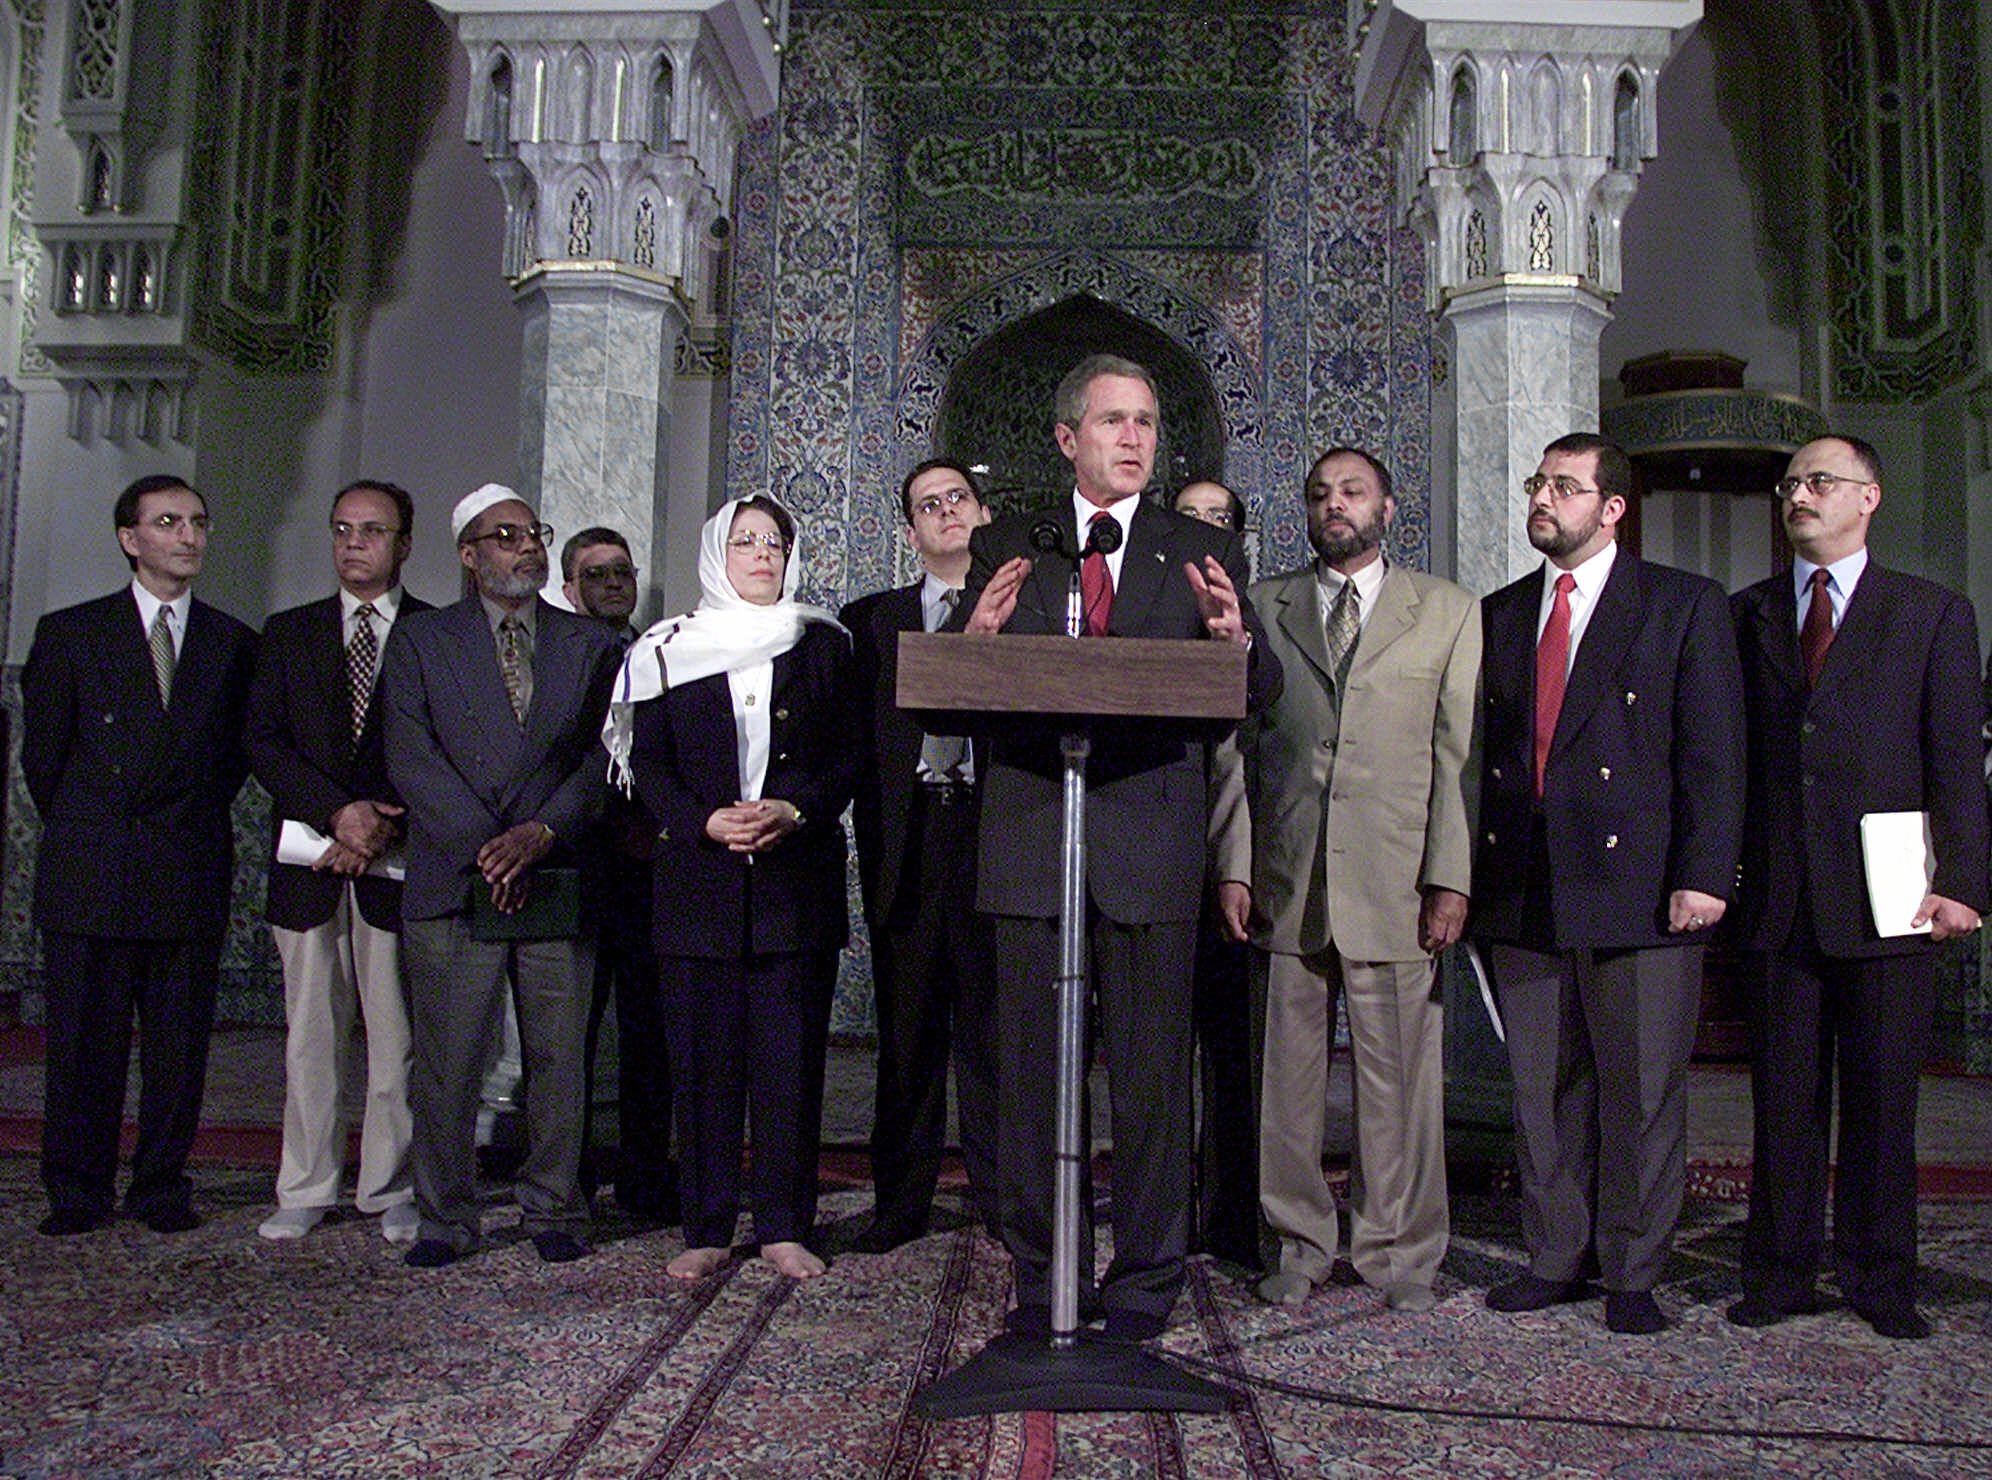 President Bush stands with Islamic leaders during a visit to the Islamic Center of  Washington, Sept. 17, 2001, to try to put an end to rising anti-Muslim sentiment in the wake of 9/11. (Doug Mills—AP)